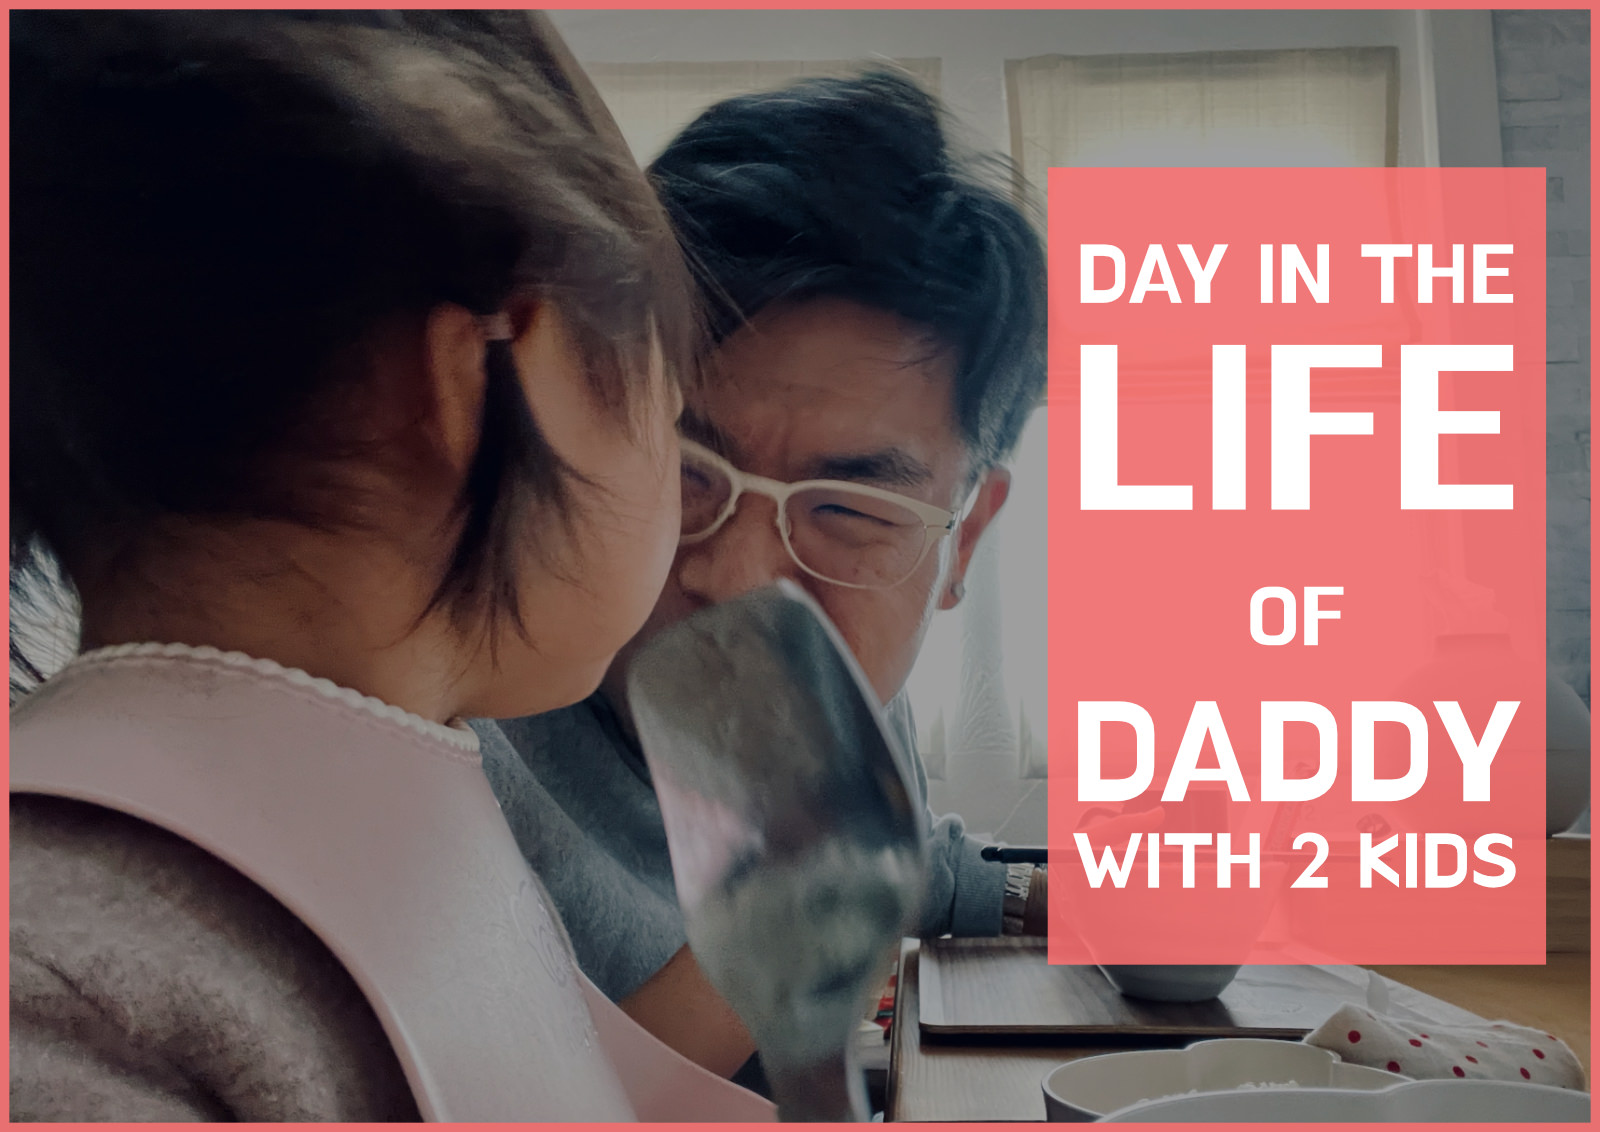 A day in the life of daddy with 2 kids